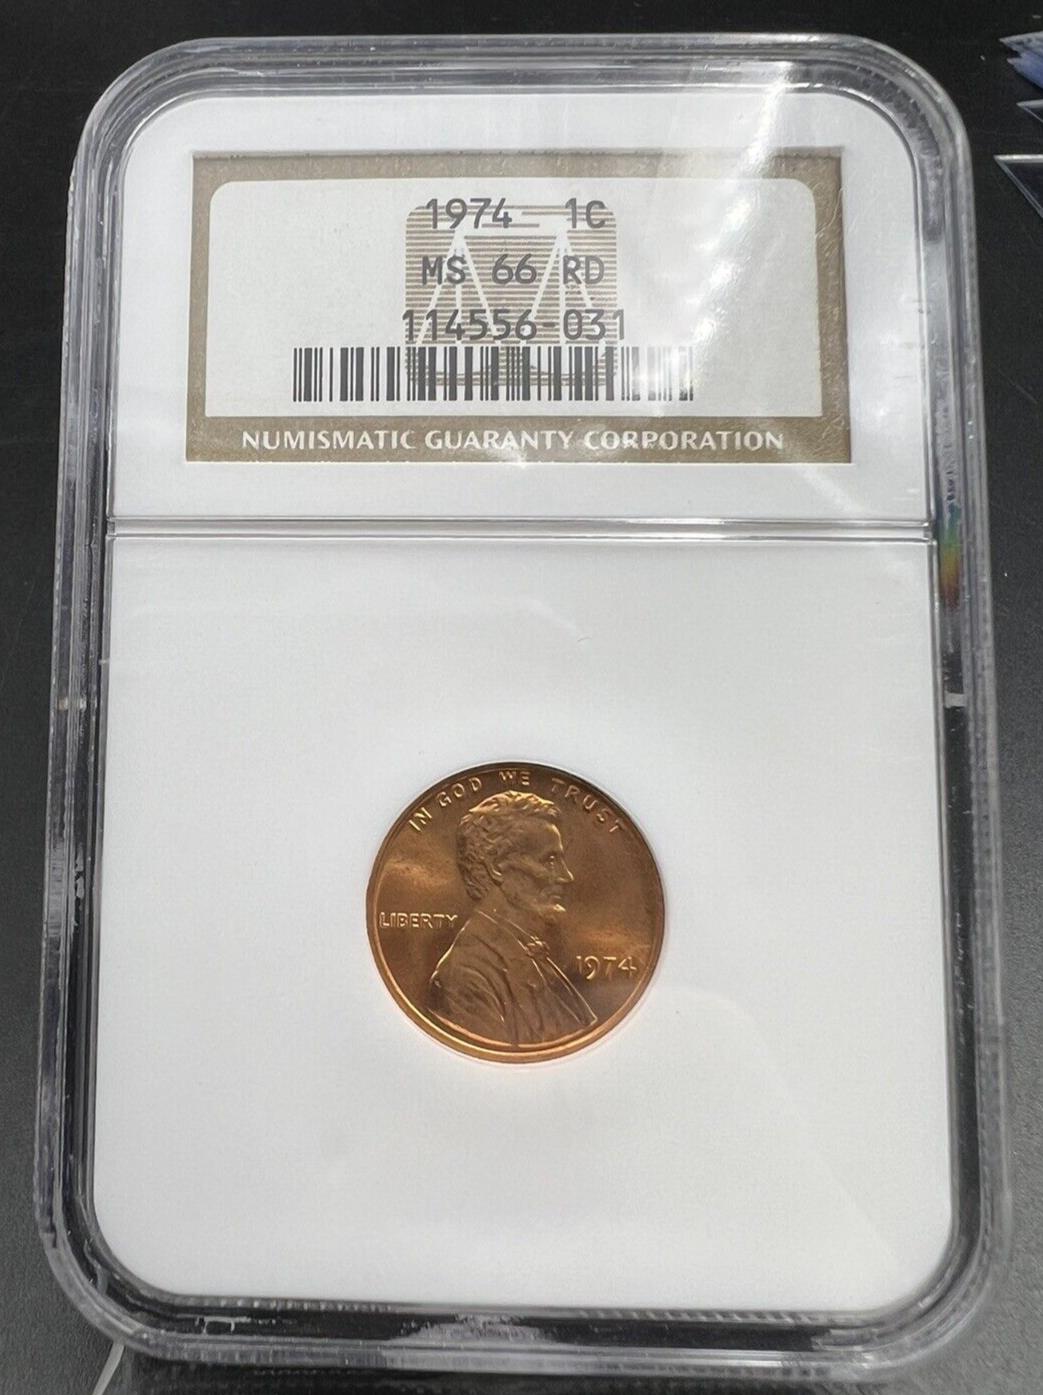 1974 P Lincoln Memorial Cent Penny Coin NGC MS66 RD Gem BU Certified #3